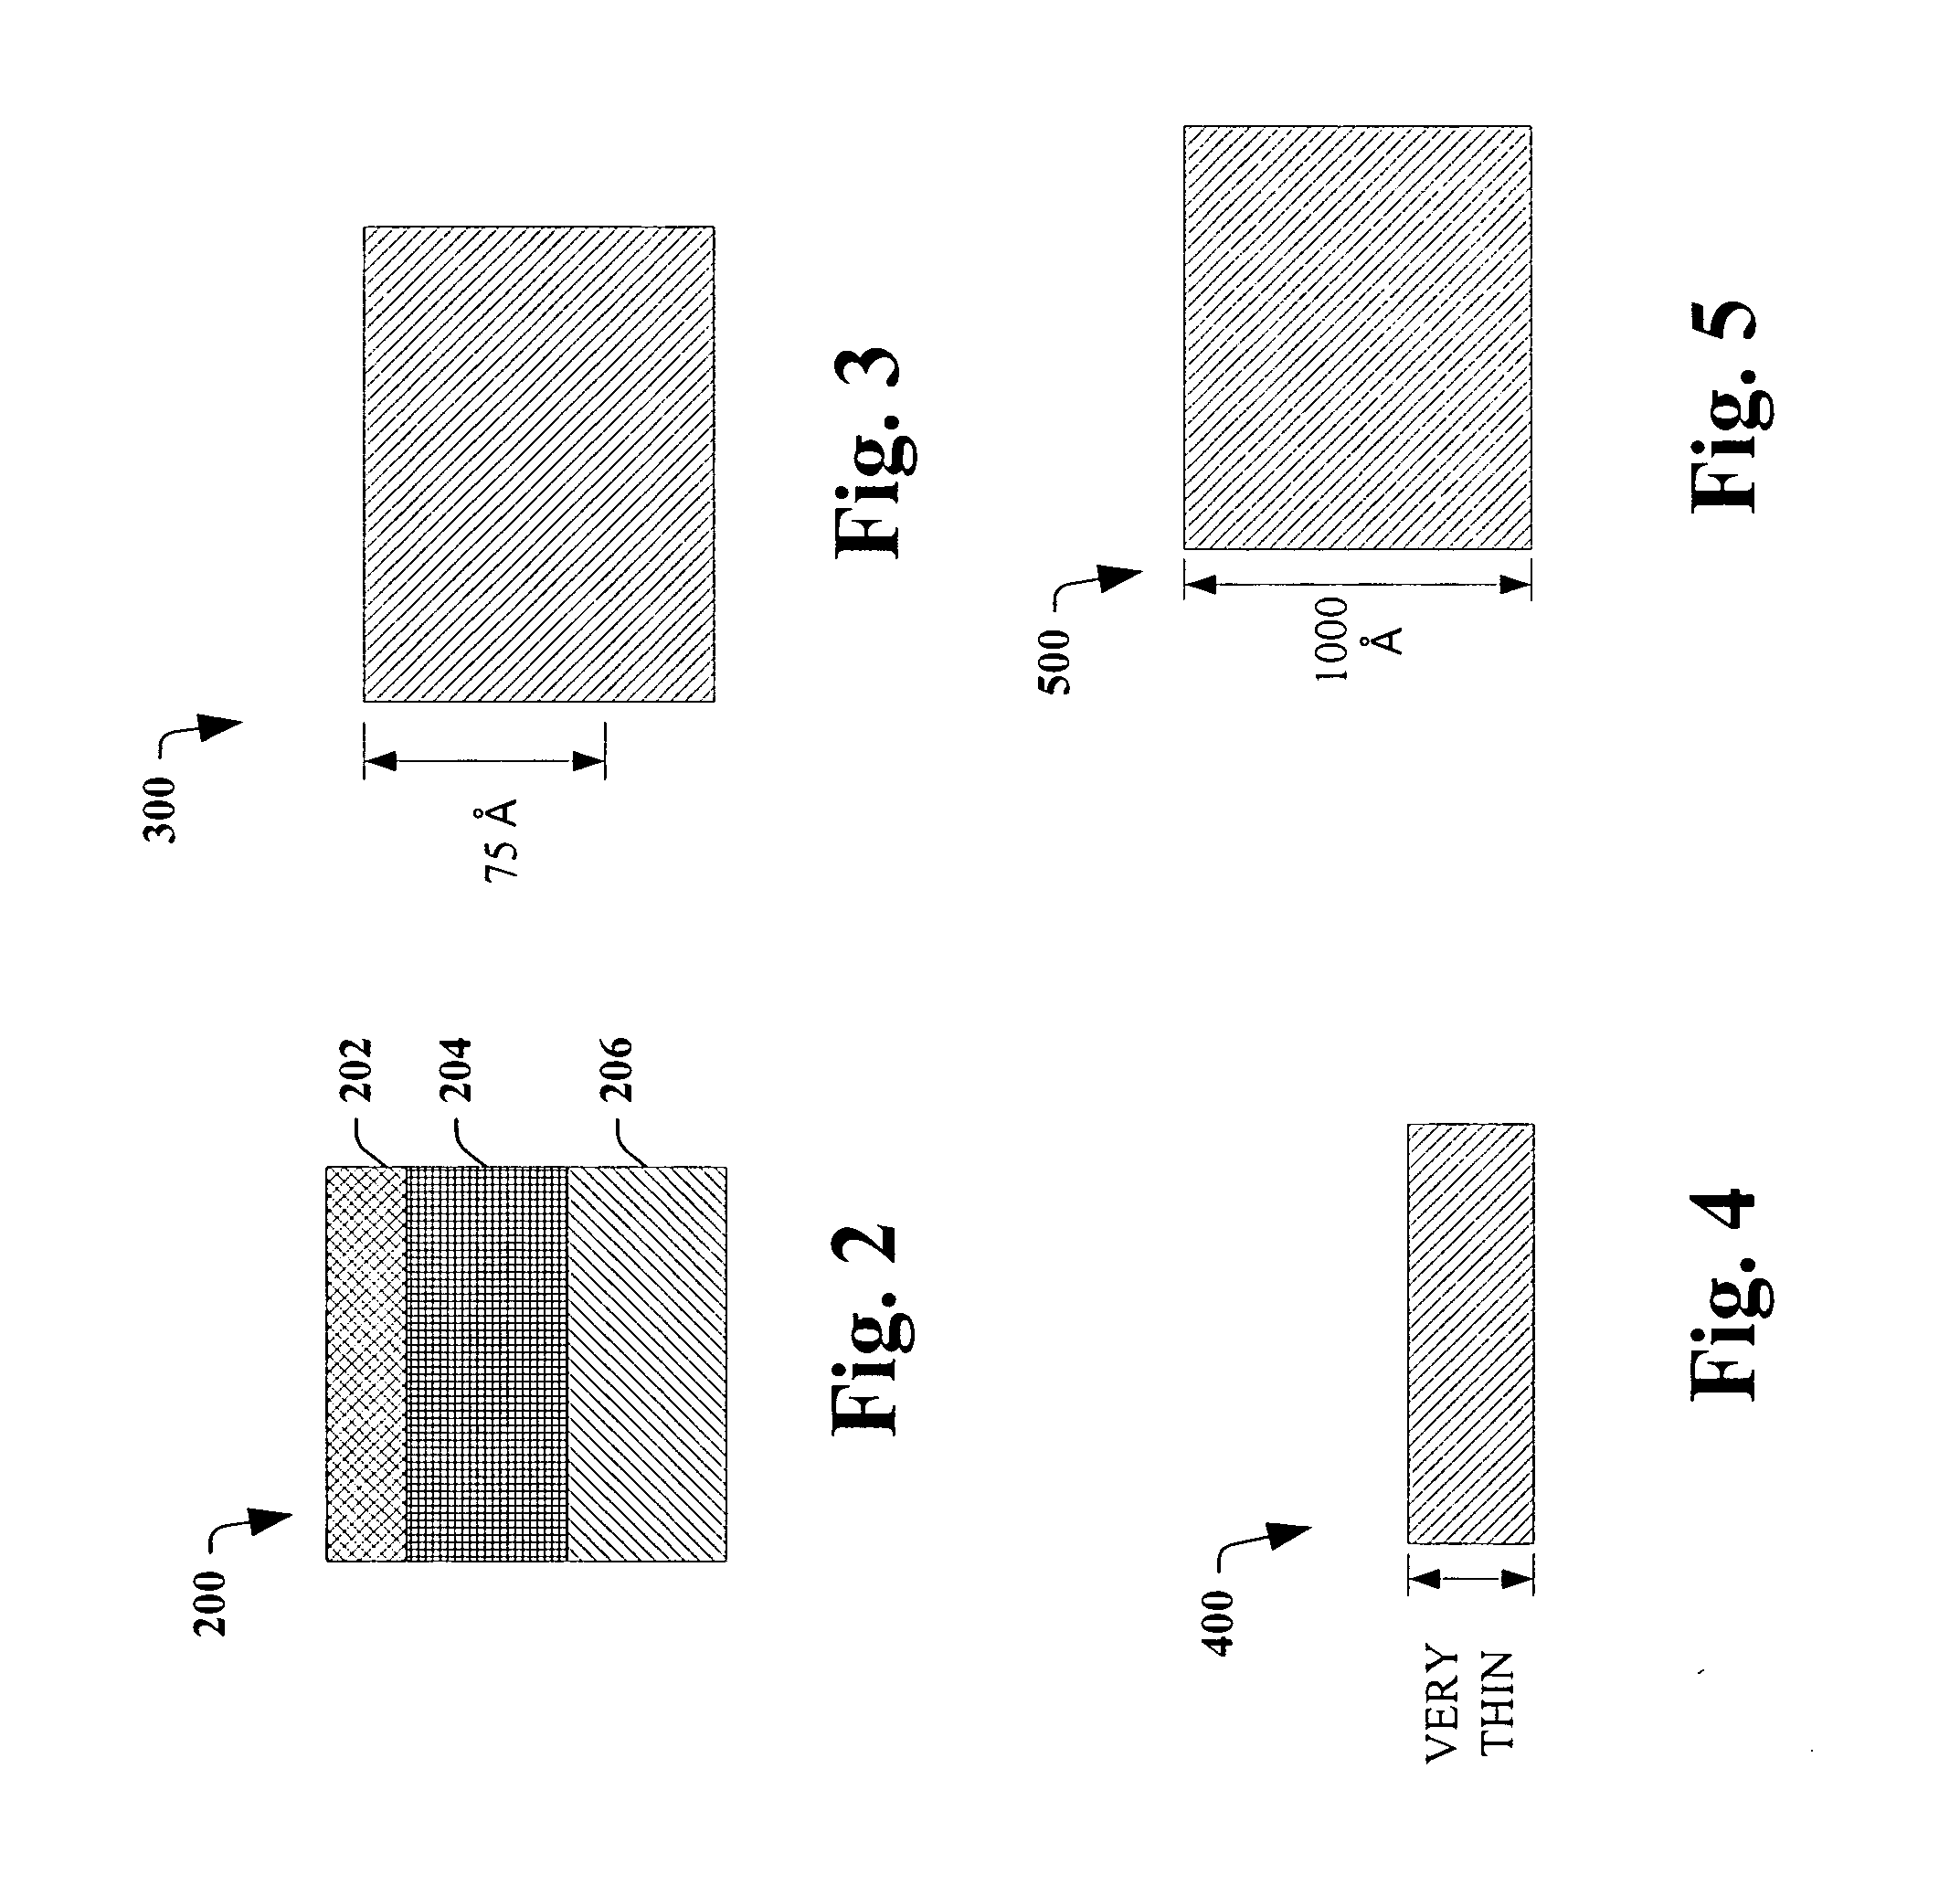 Sidewall formation for high density polymer memory element array